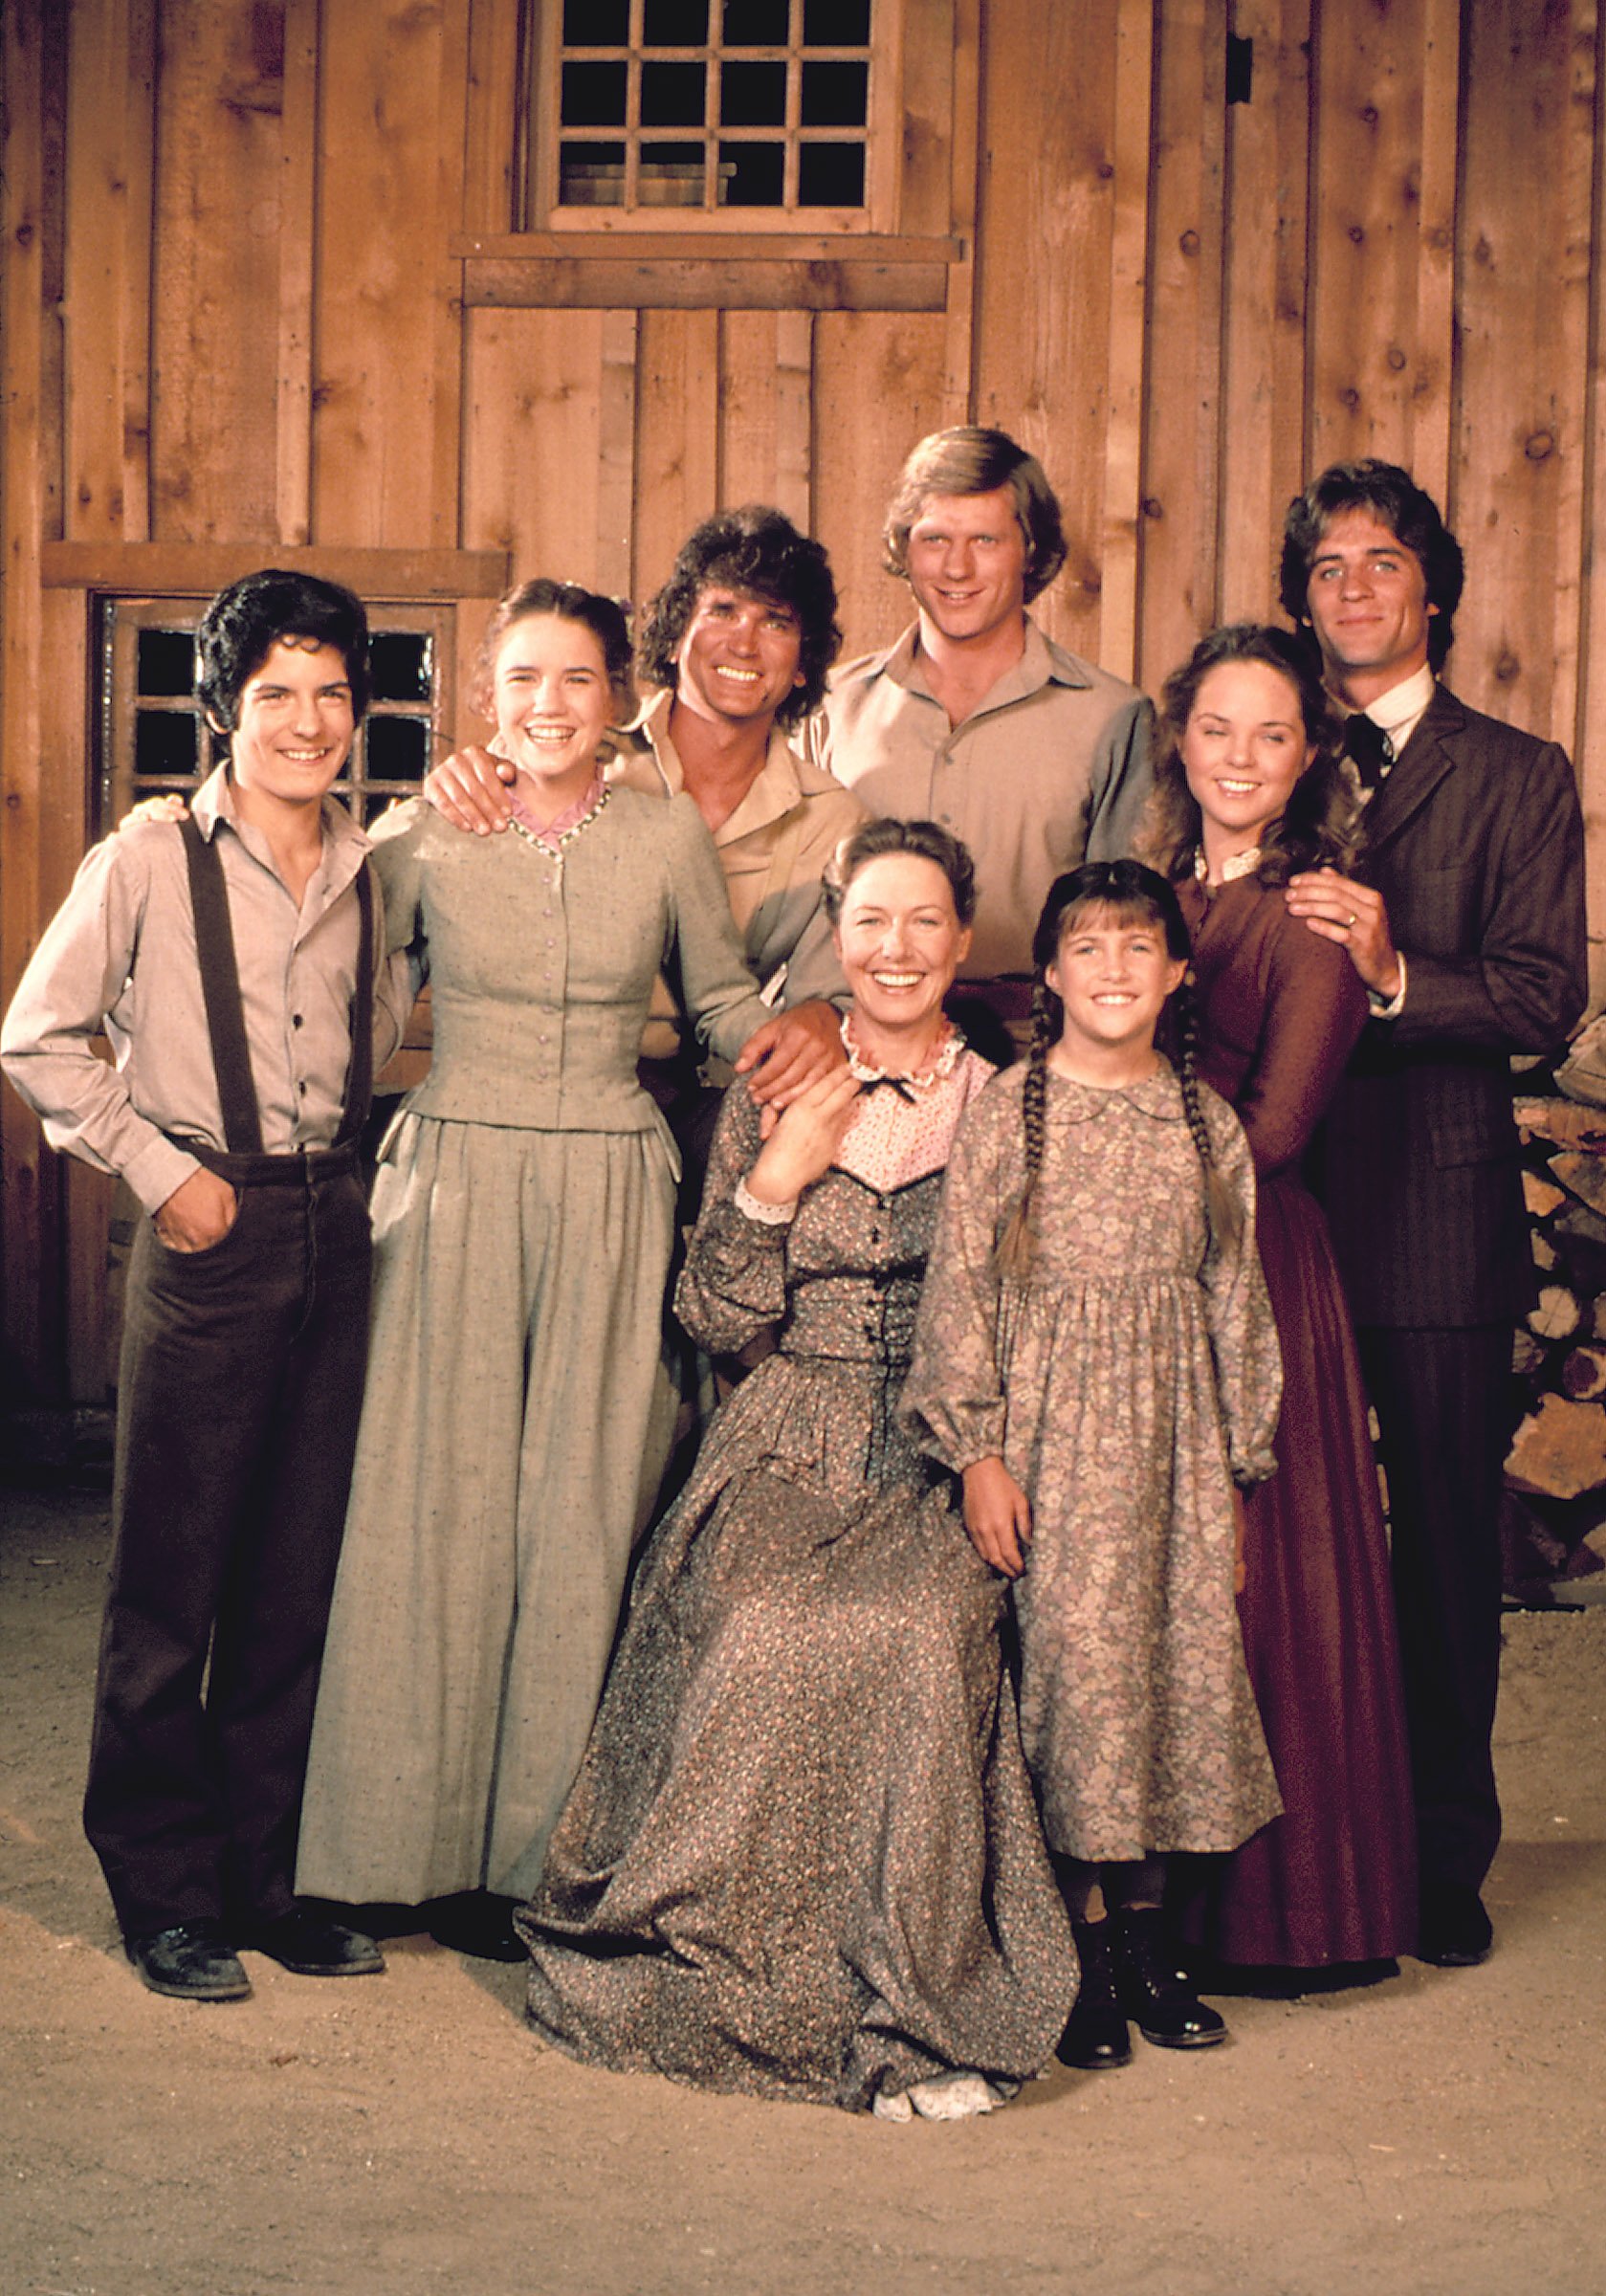 Why They Blew Up The Town At The End Of 'Little House On The Prairie'